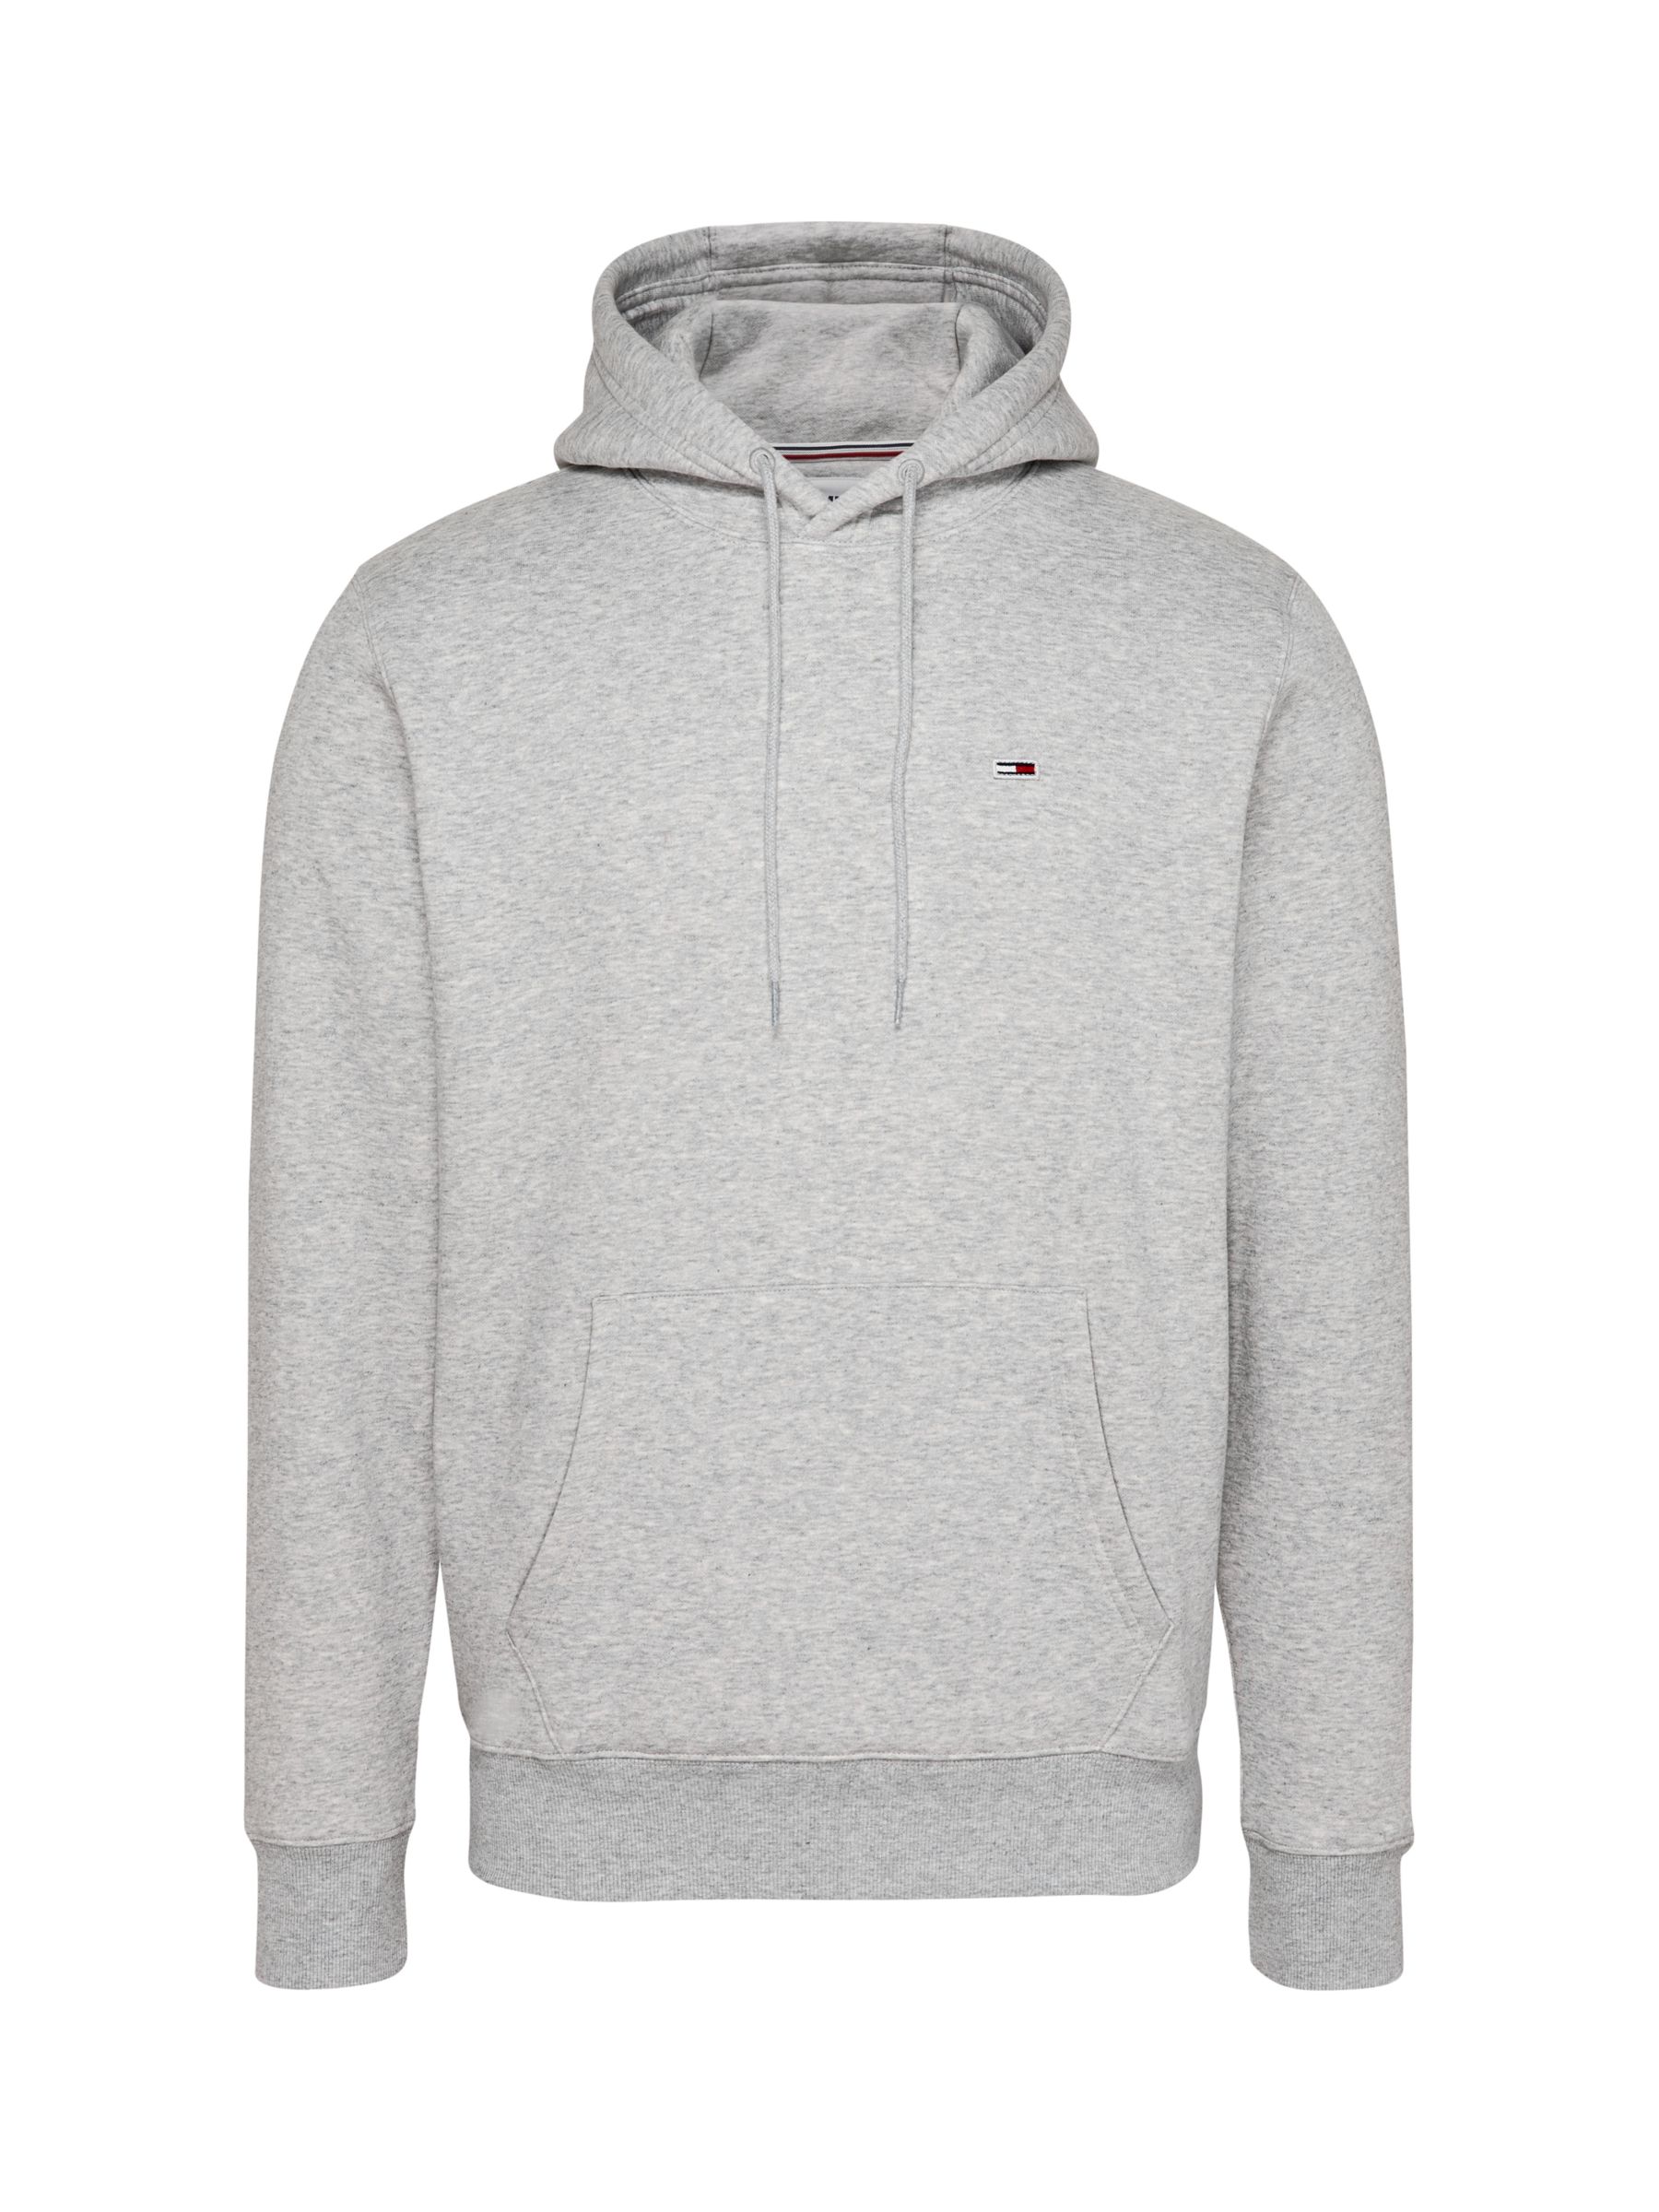 Tommy Hilfiger Womens Everyday Fleece Graphic Hoodie Sweatshirt :  : Clothing, Shoes & Accessories